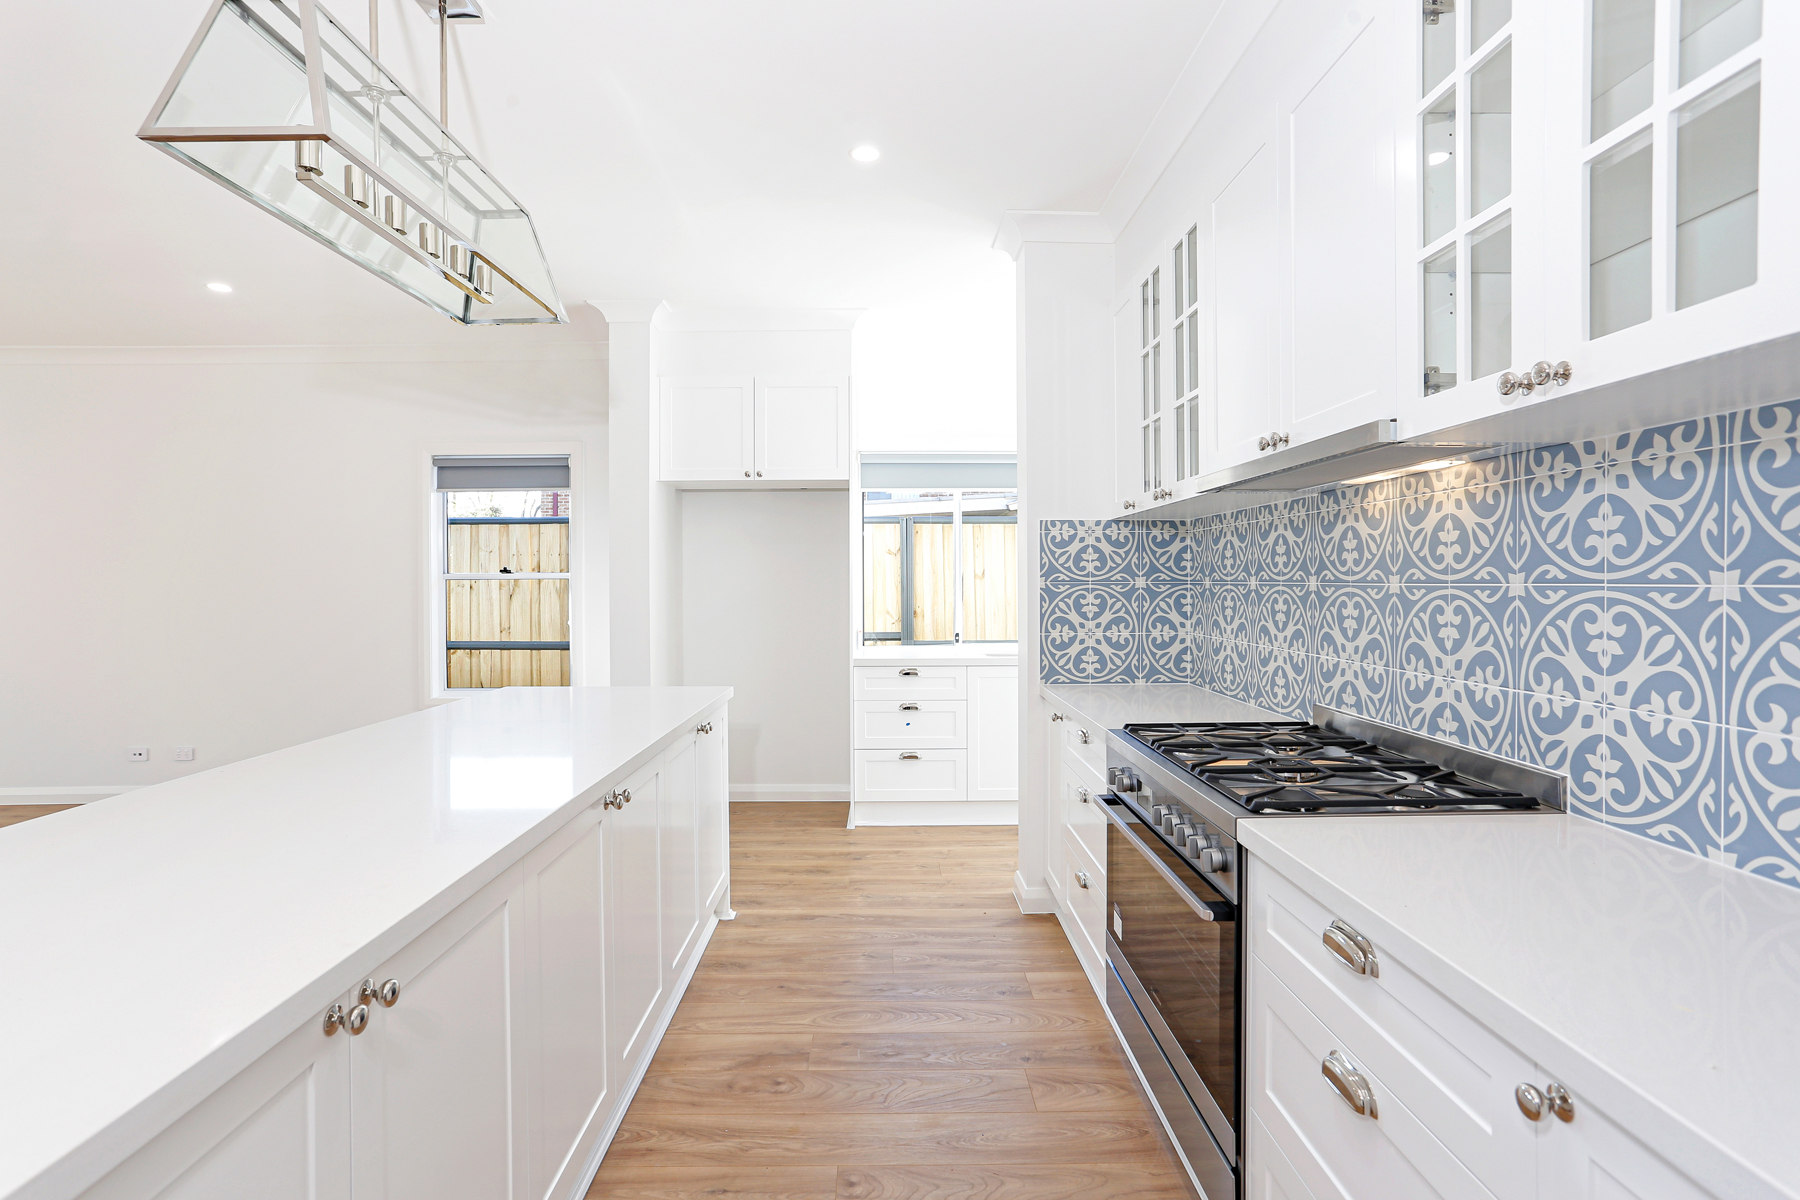 A Kitchen With White Cabinets And A Blue Tile Backsplash